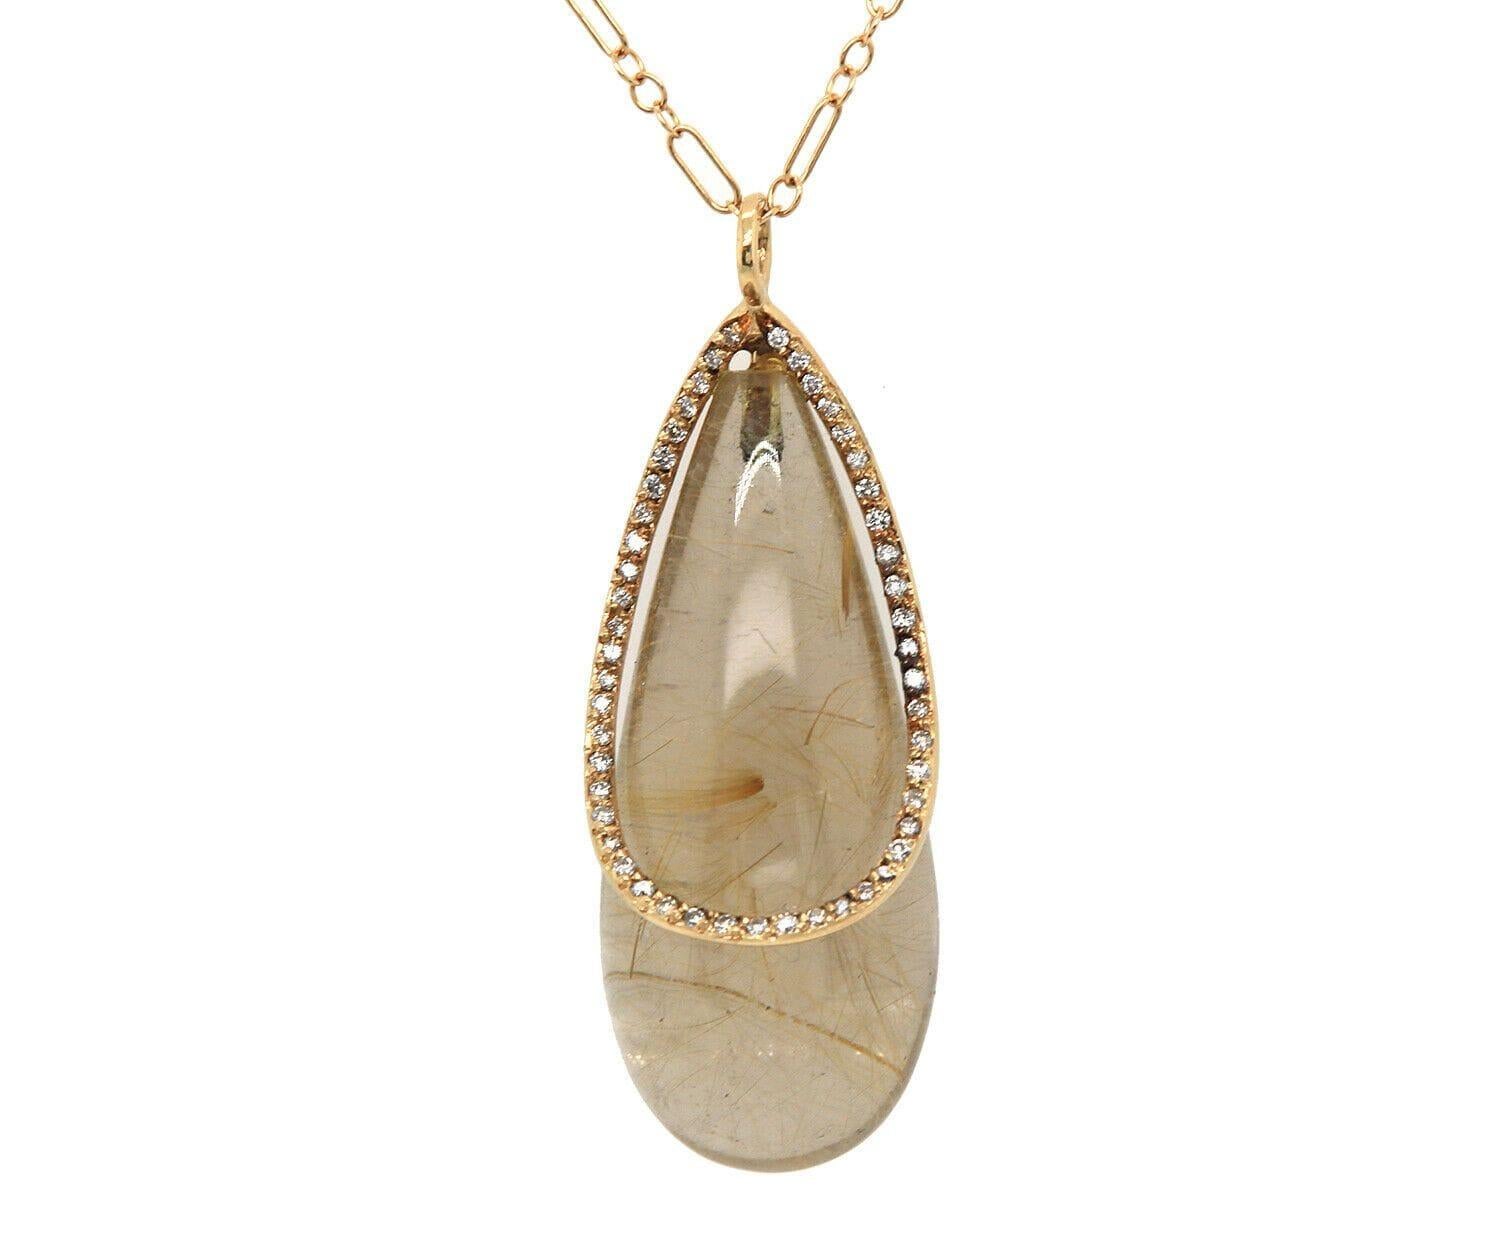 Mauri Pioppo Rutilated Quartz and Diamond Pendant Necklace in 18K

Maruri Pioppo Rutilated Quartz and Diamond Pendant Necklace
18K Yellow Gold
Diamonds Carat Weight: Approx. 0.35ctw
Pendant Dimensions: Approx. 15.0 X 44.0 MM
Necklace Length: Approx.